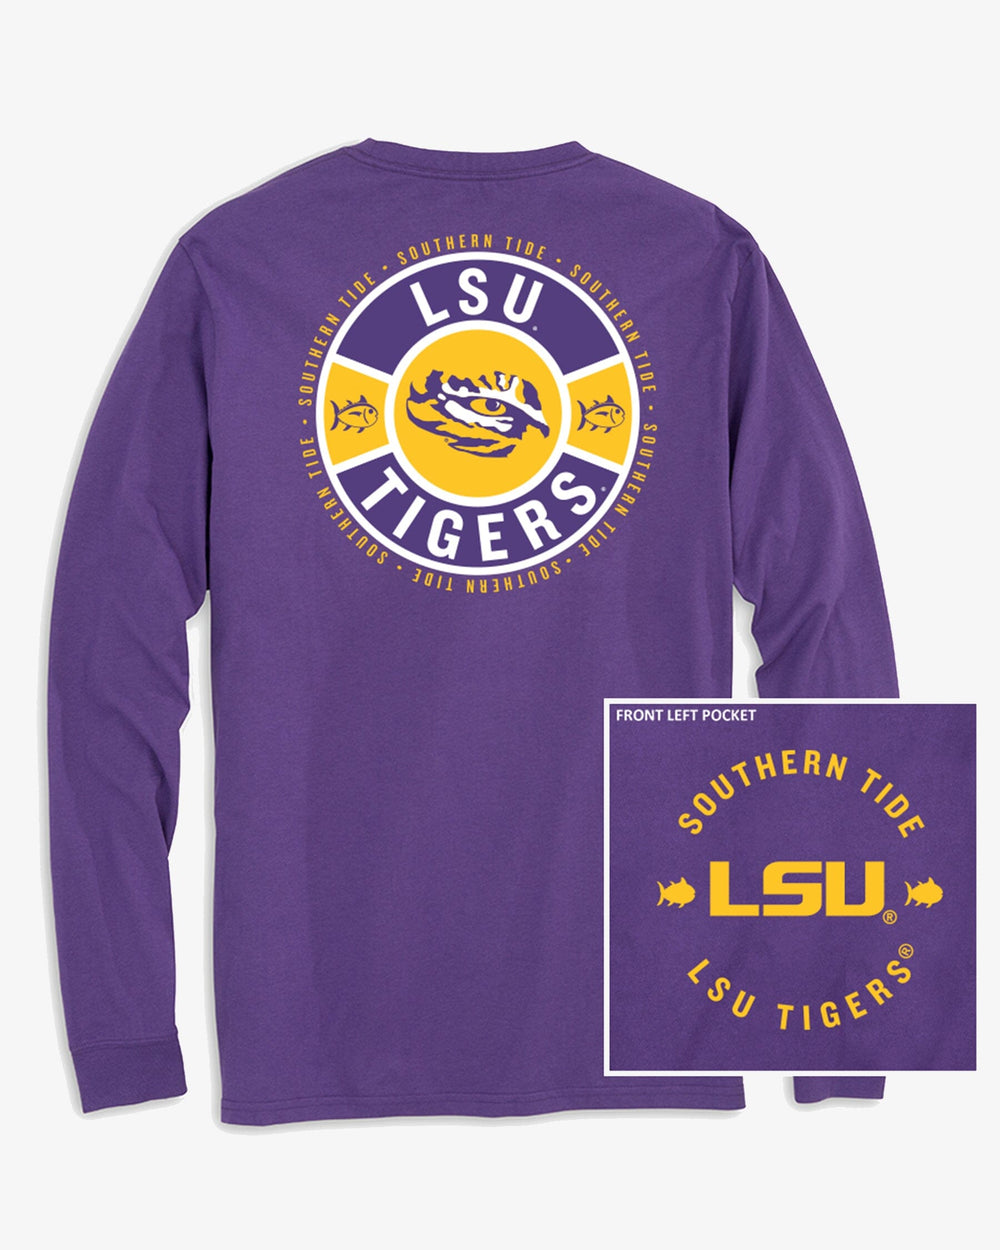 The front view of the Southern Tide LSU Tigers Ring Badge T-Shirt by Southern Tide - Regal Purple